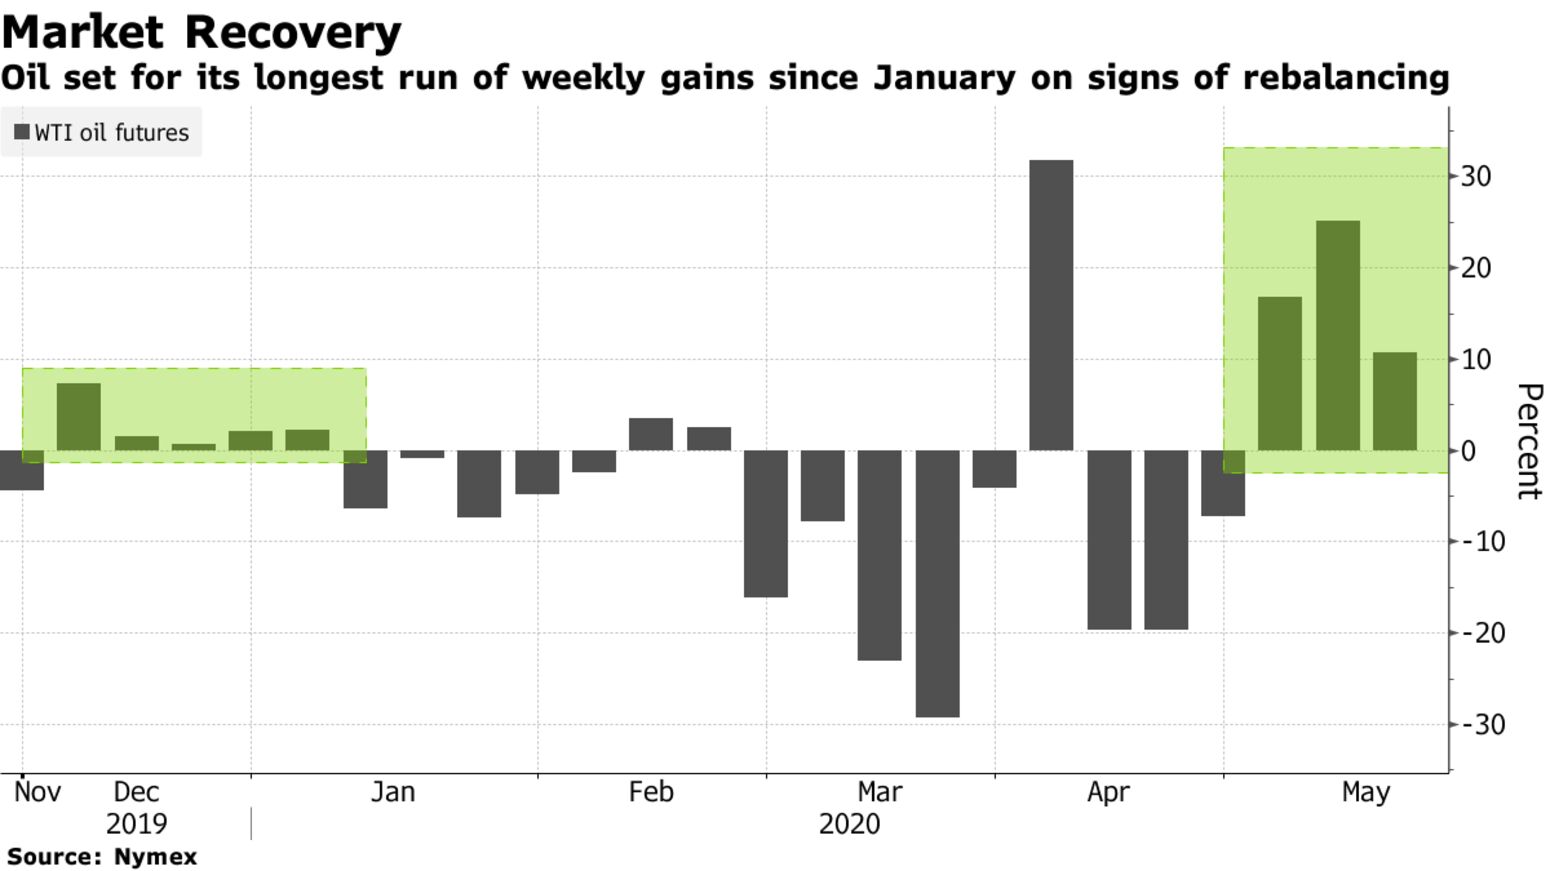 Oil set for its longest run of weekly gains since January on signs of rebalancing